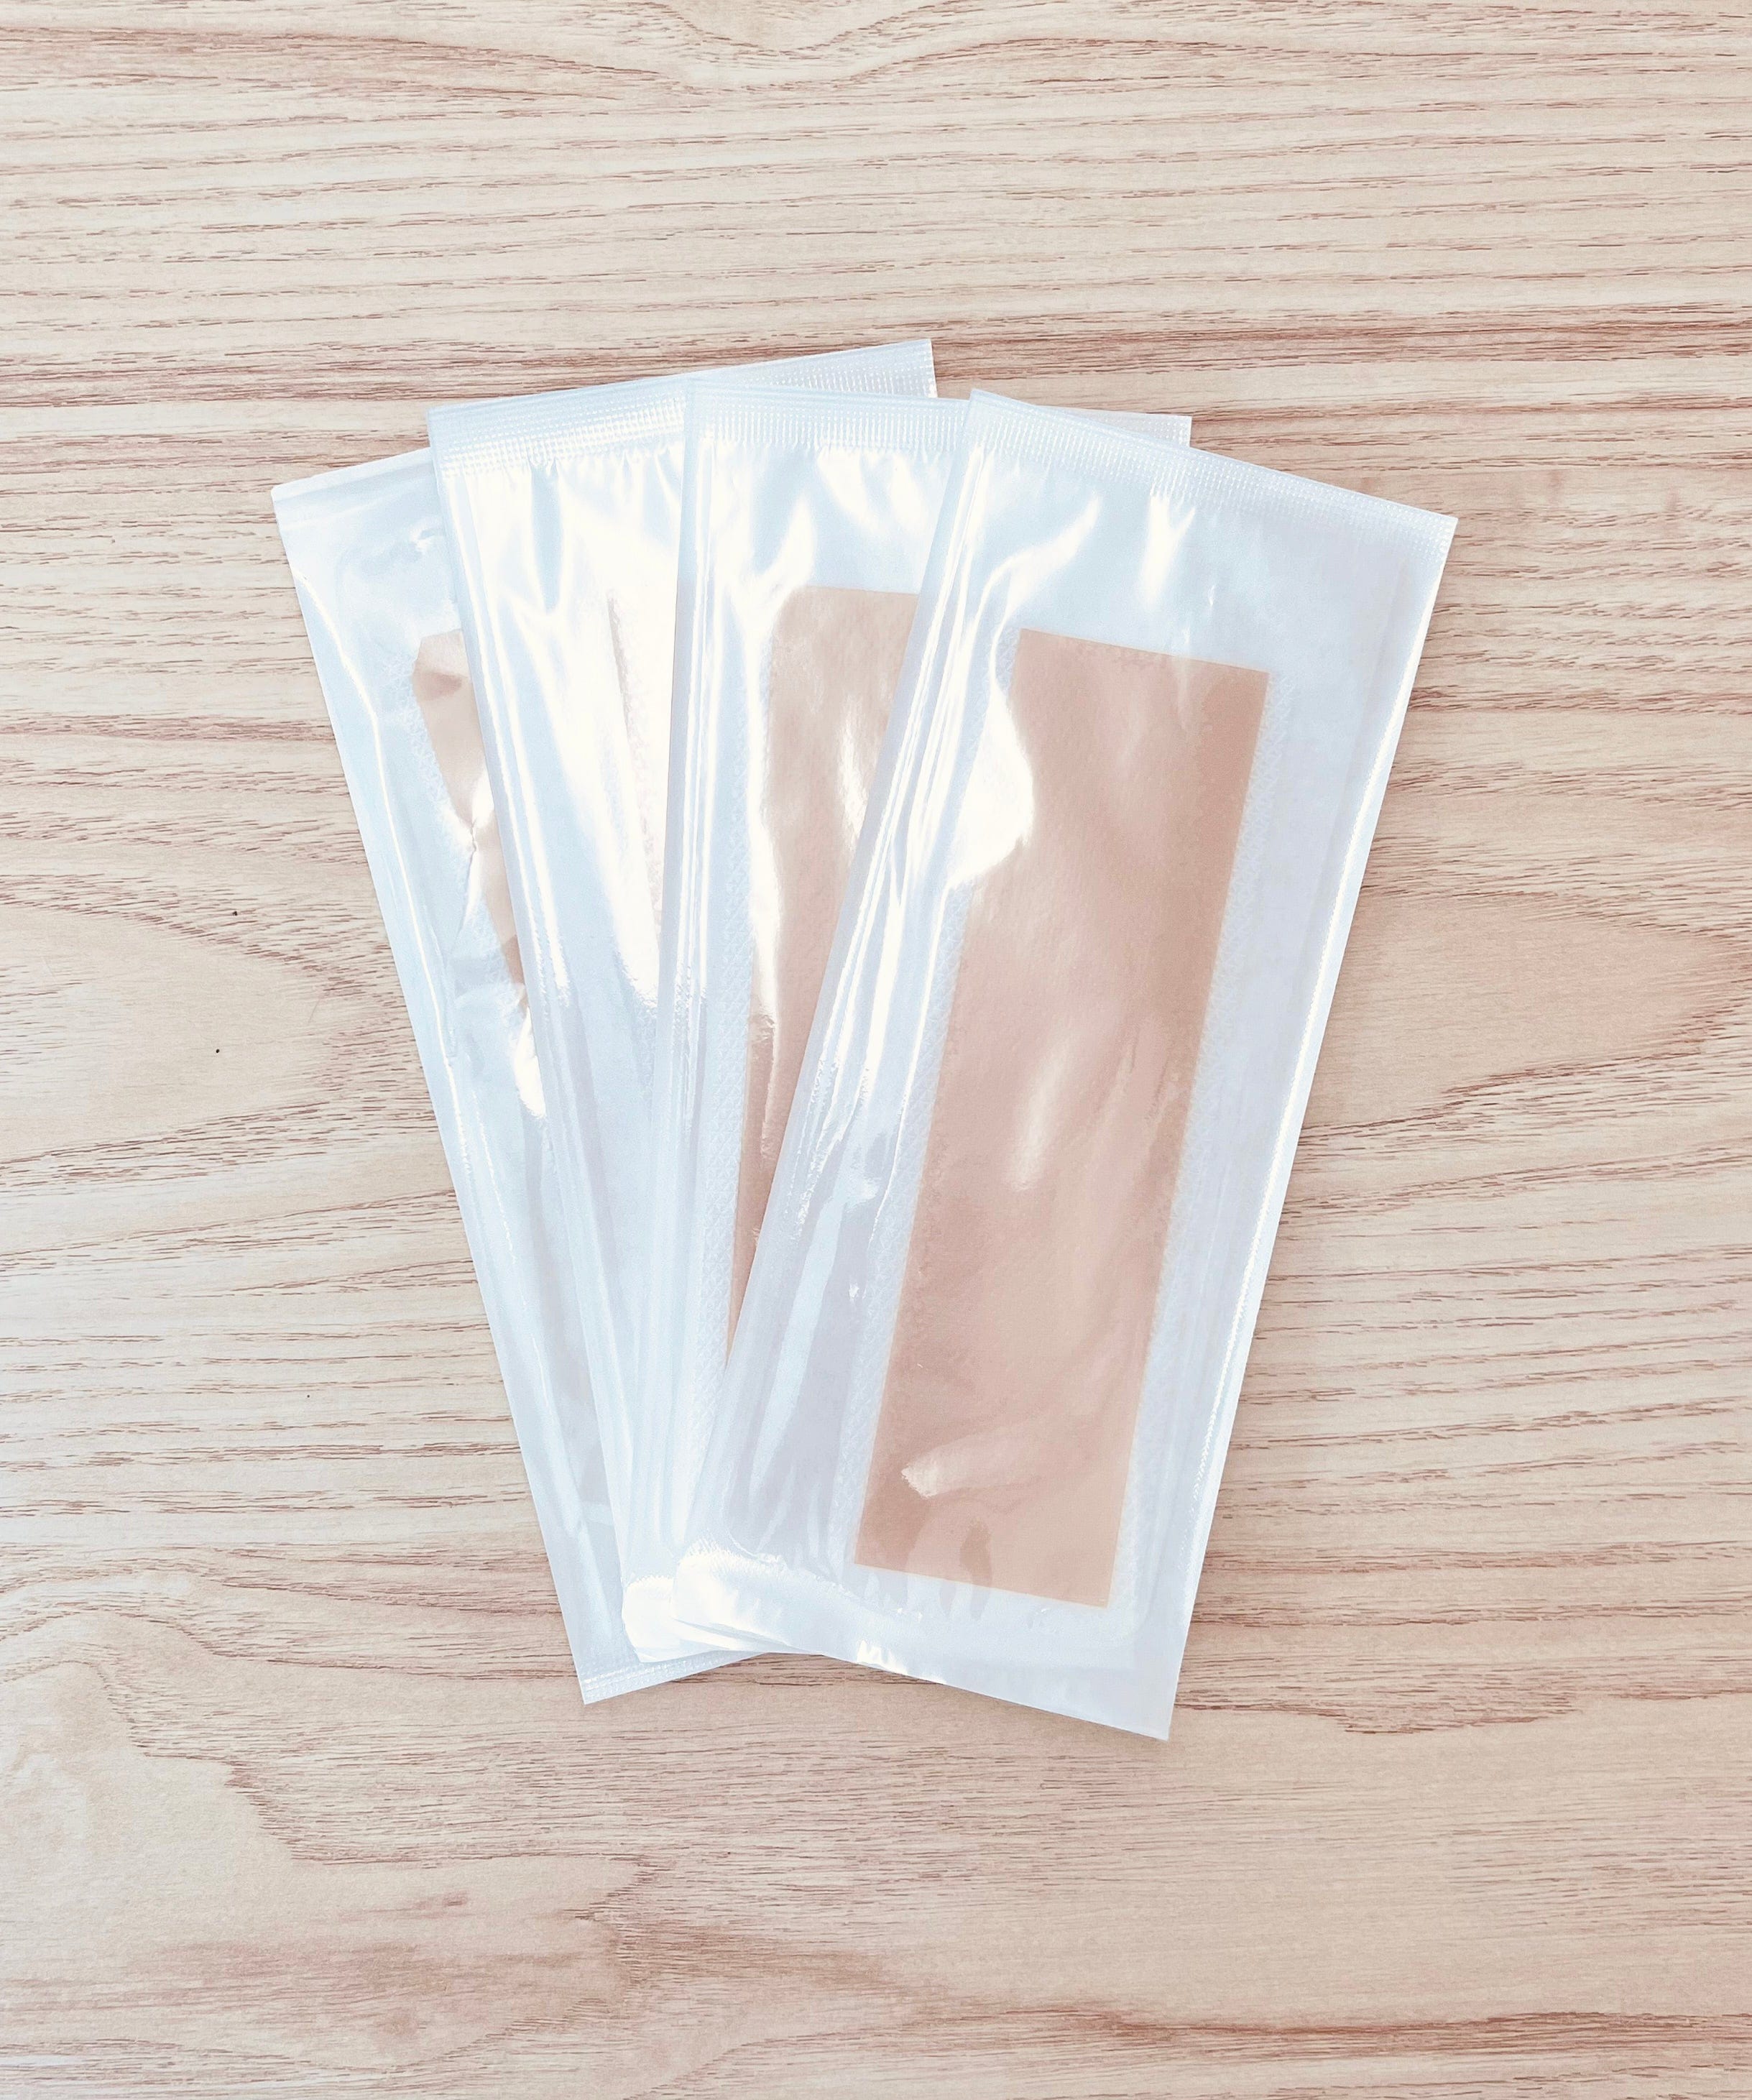 C-Section Silicone Gel Strips Mumasil Recovery 0607609019152 Preggi Central Maternity Shop